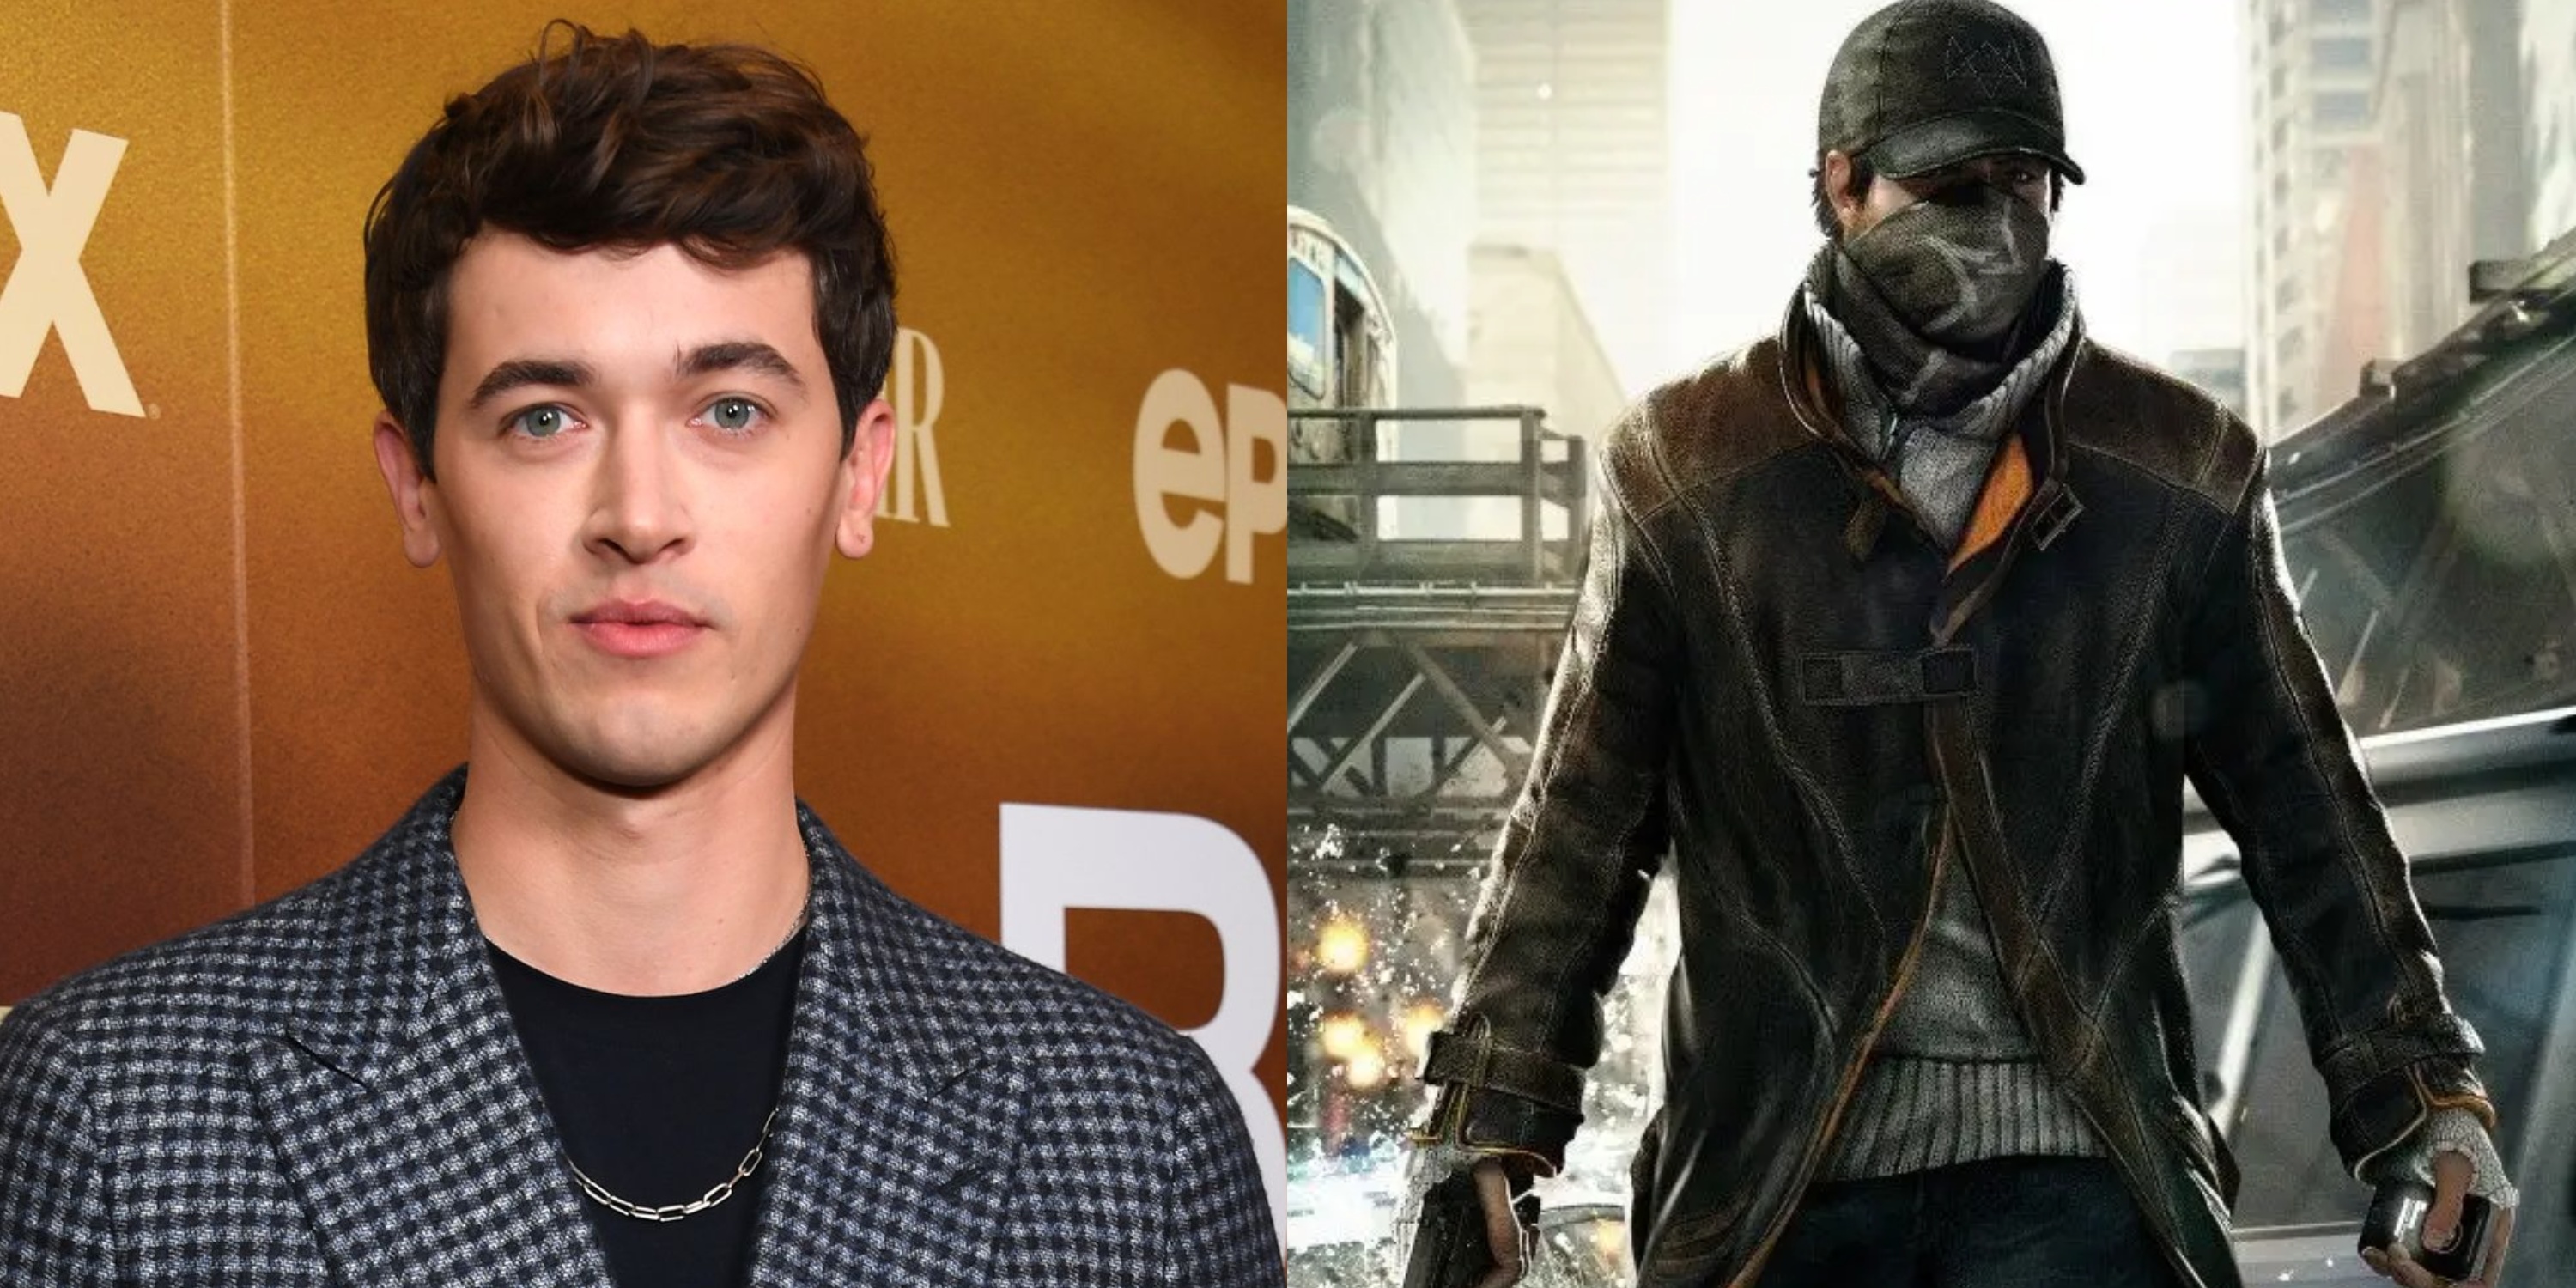 Deadline is exclusively reporting that Tom Blyth is set to star opposite Sophie Wilde in the film adaptation of the Ubisoft video game series Watch Dogs at New Regency.